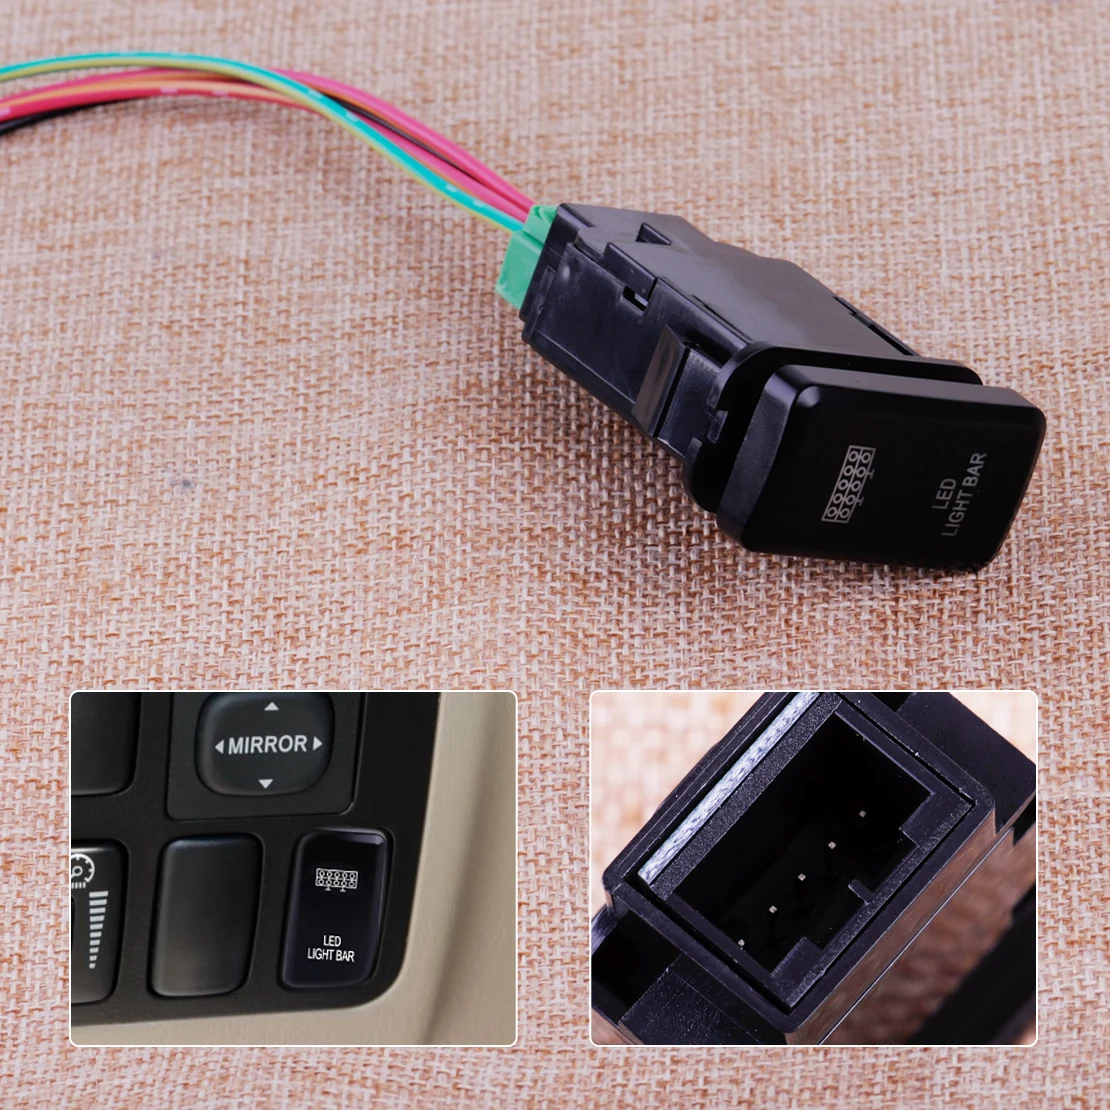 

12V LED Fog Light Push Button on/off Switch with Harness Wire Fit for Toyota Prado Landcruiser FJ Cruiser Tacoma Hilux